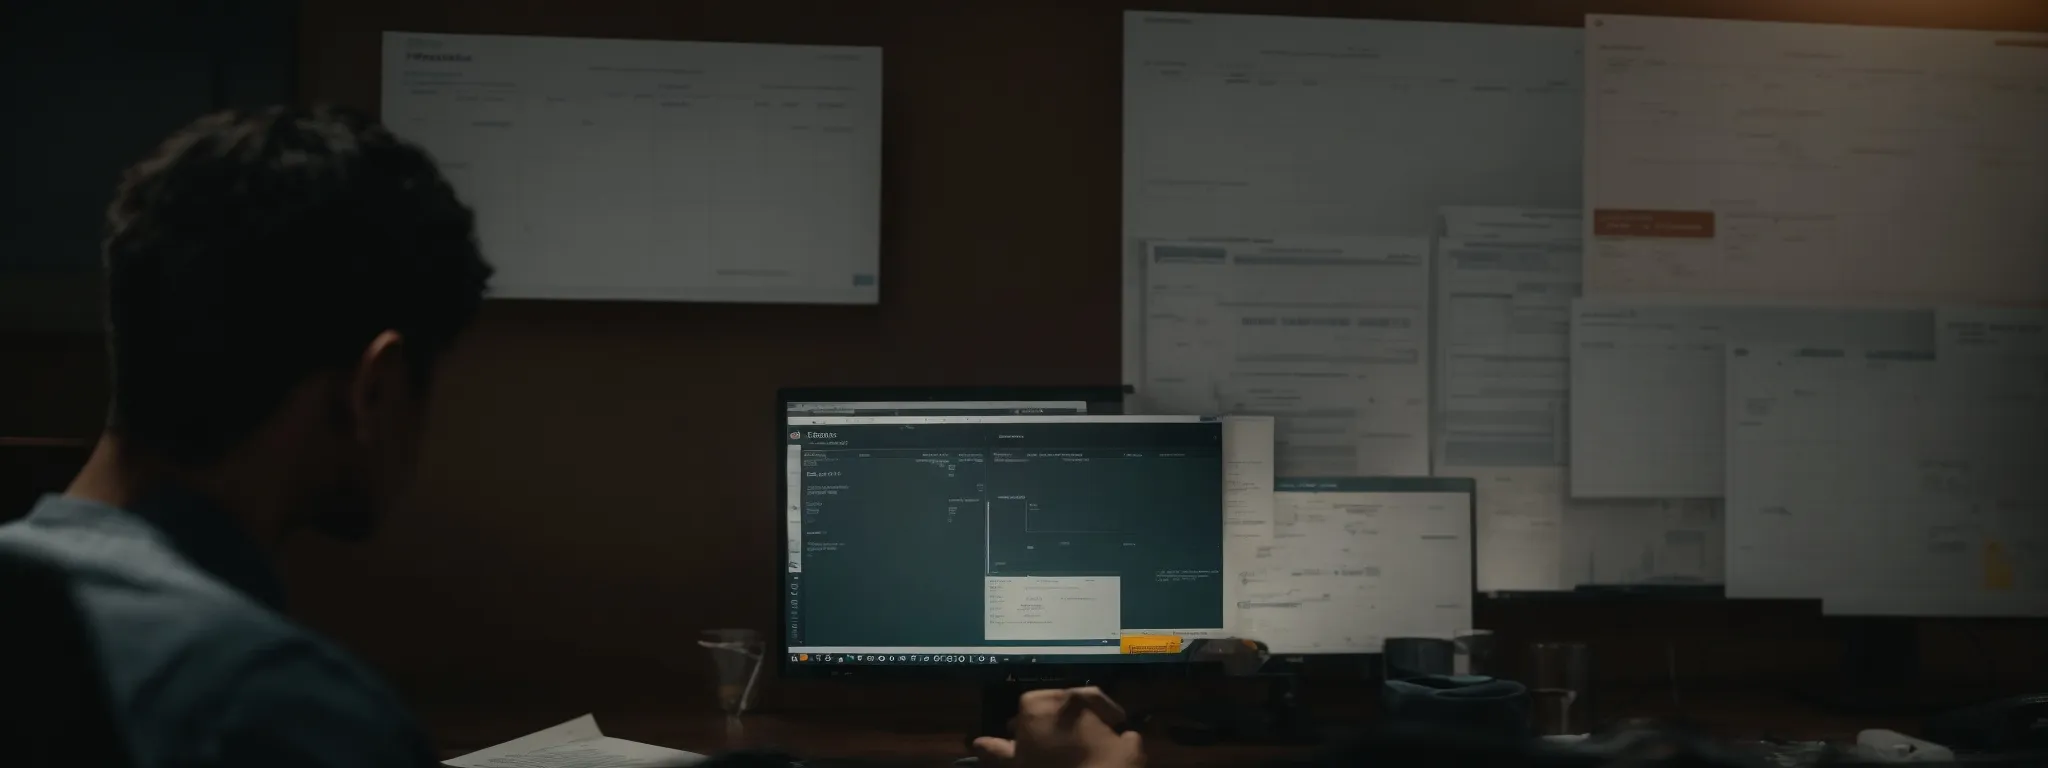 a scene with an individual analyzing detailed analytics on a computer screen while surrounded by organized notes and a digital calendar indicating key project milestones.